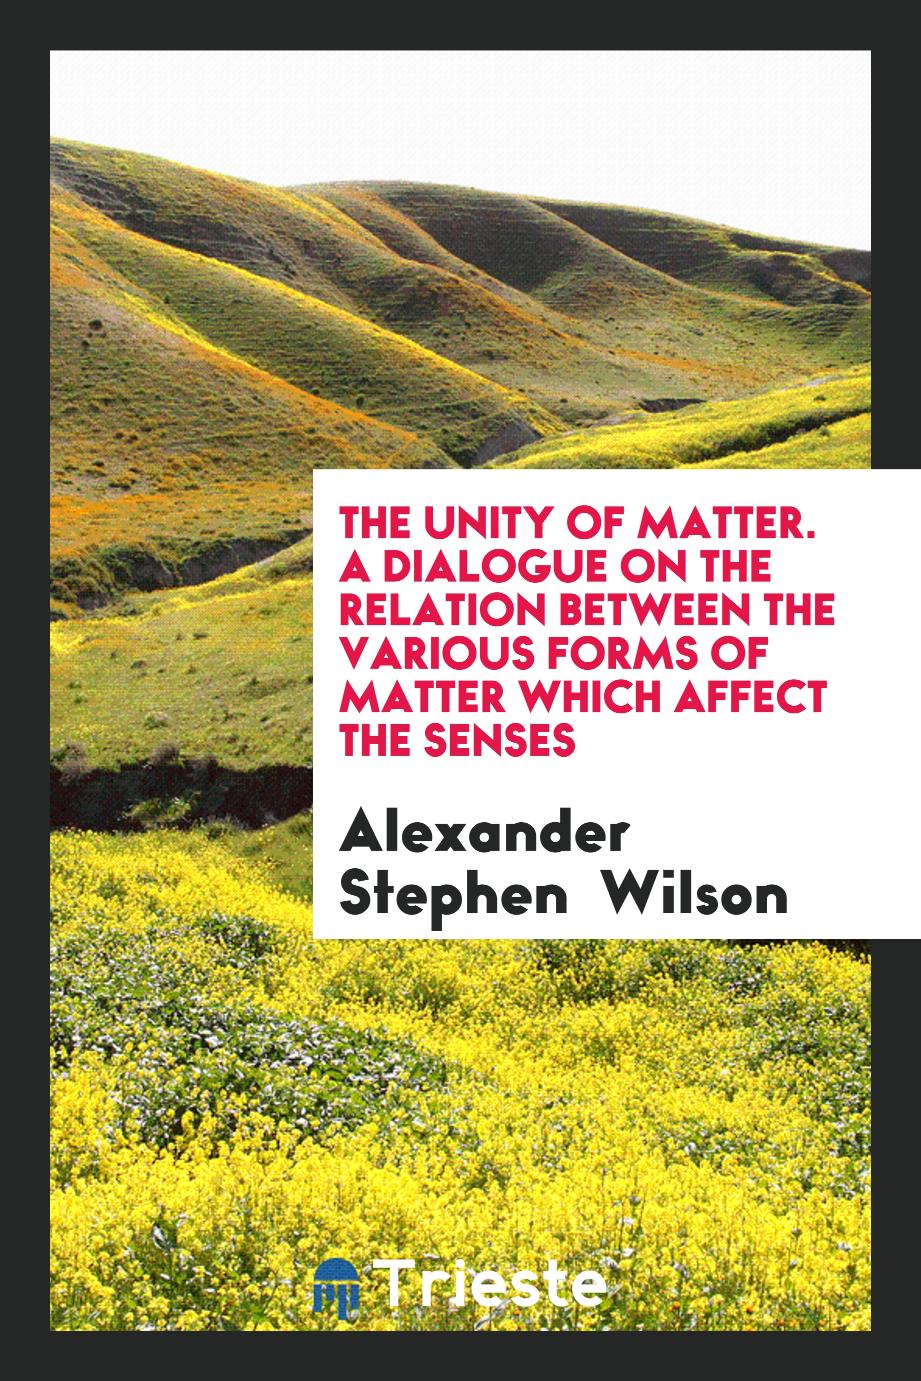 The Unity of Matter. A Dialogue on the Relation Between the Various Forms of Matter Which Affect the Senses